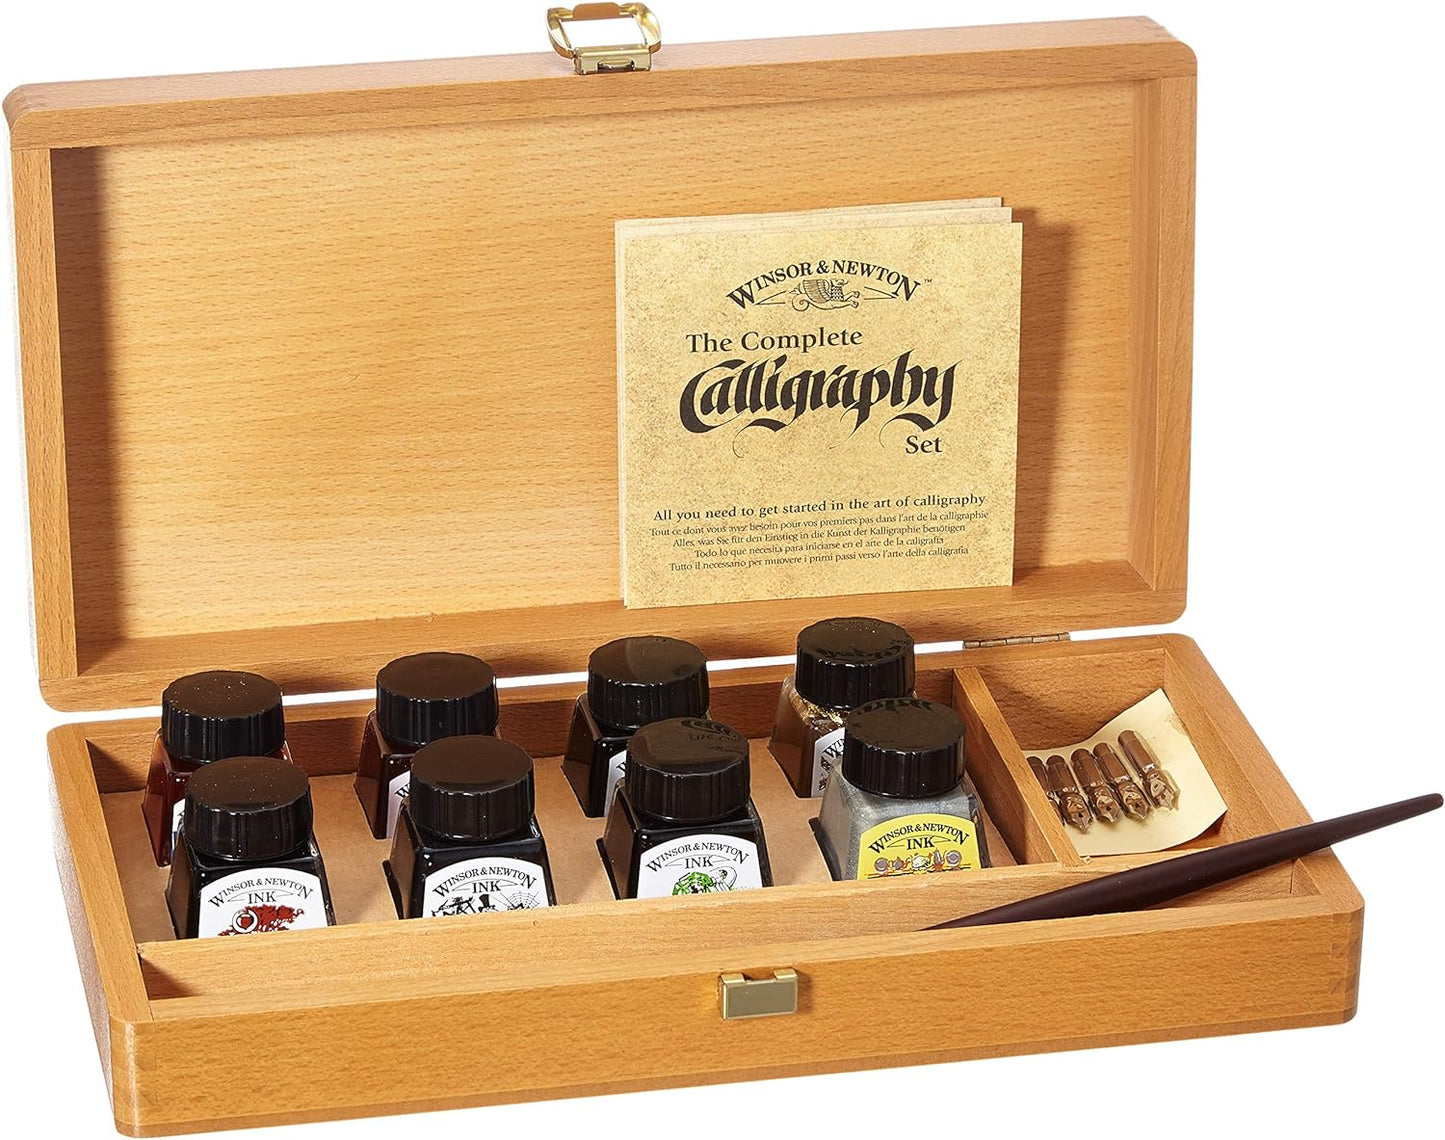 Calligraphy Wooden Box Set - With Drawing Inks